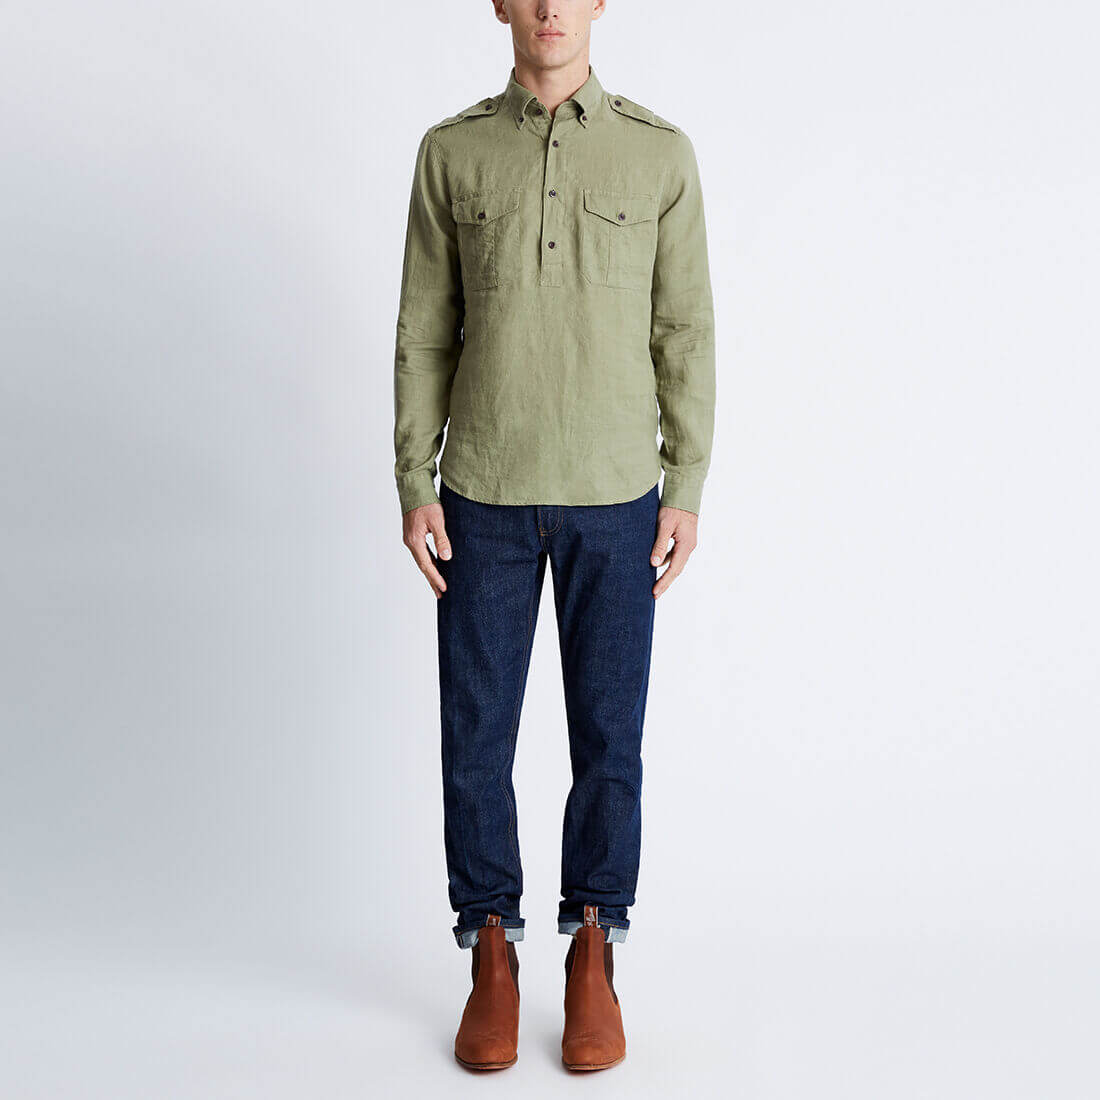 Buy > rm williams work shirts > in stock